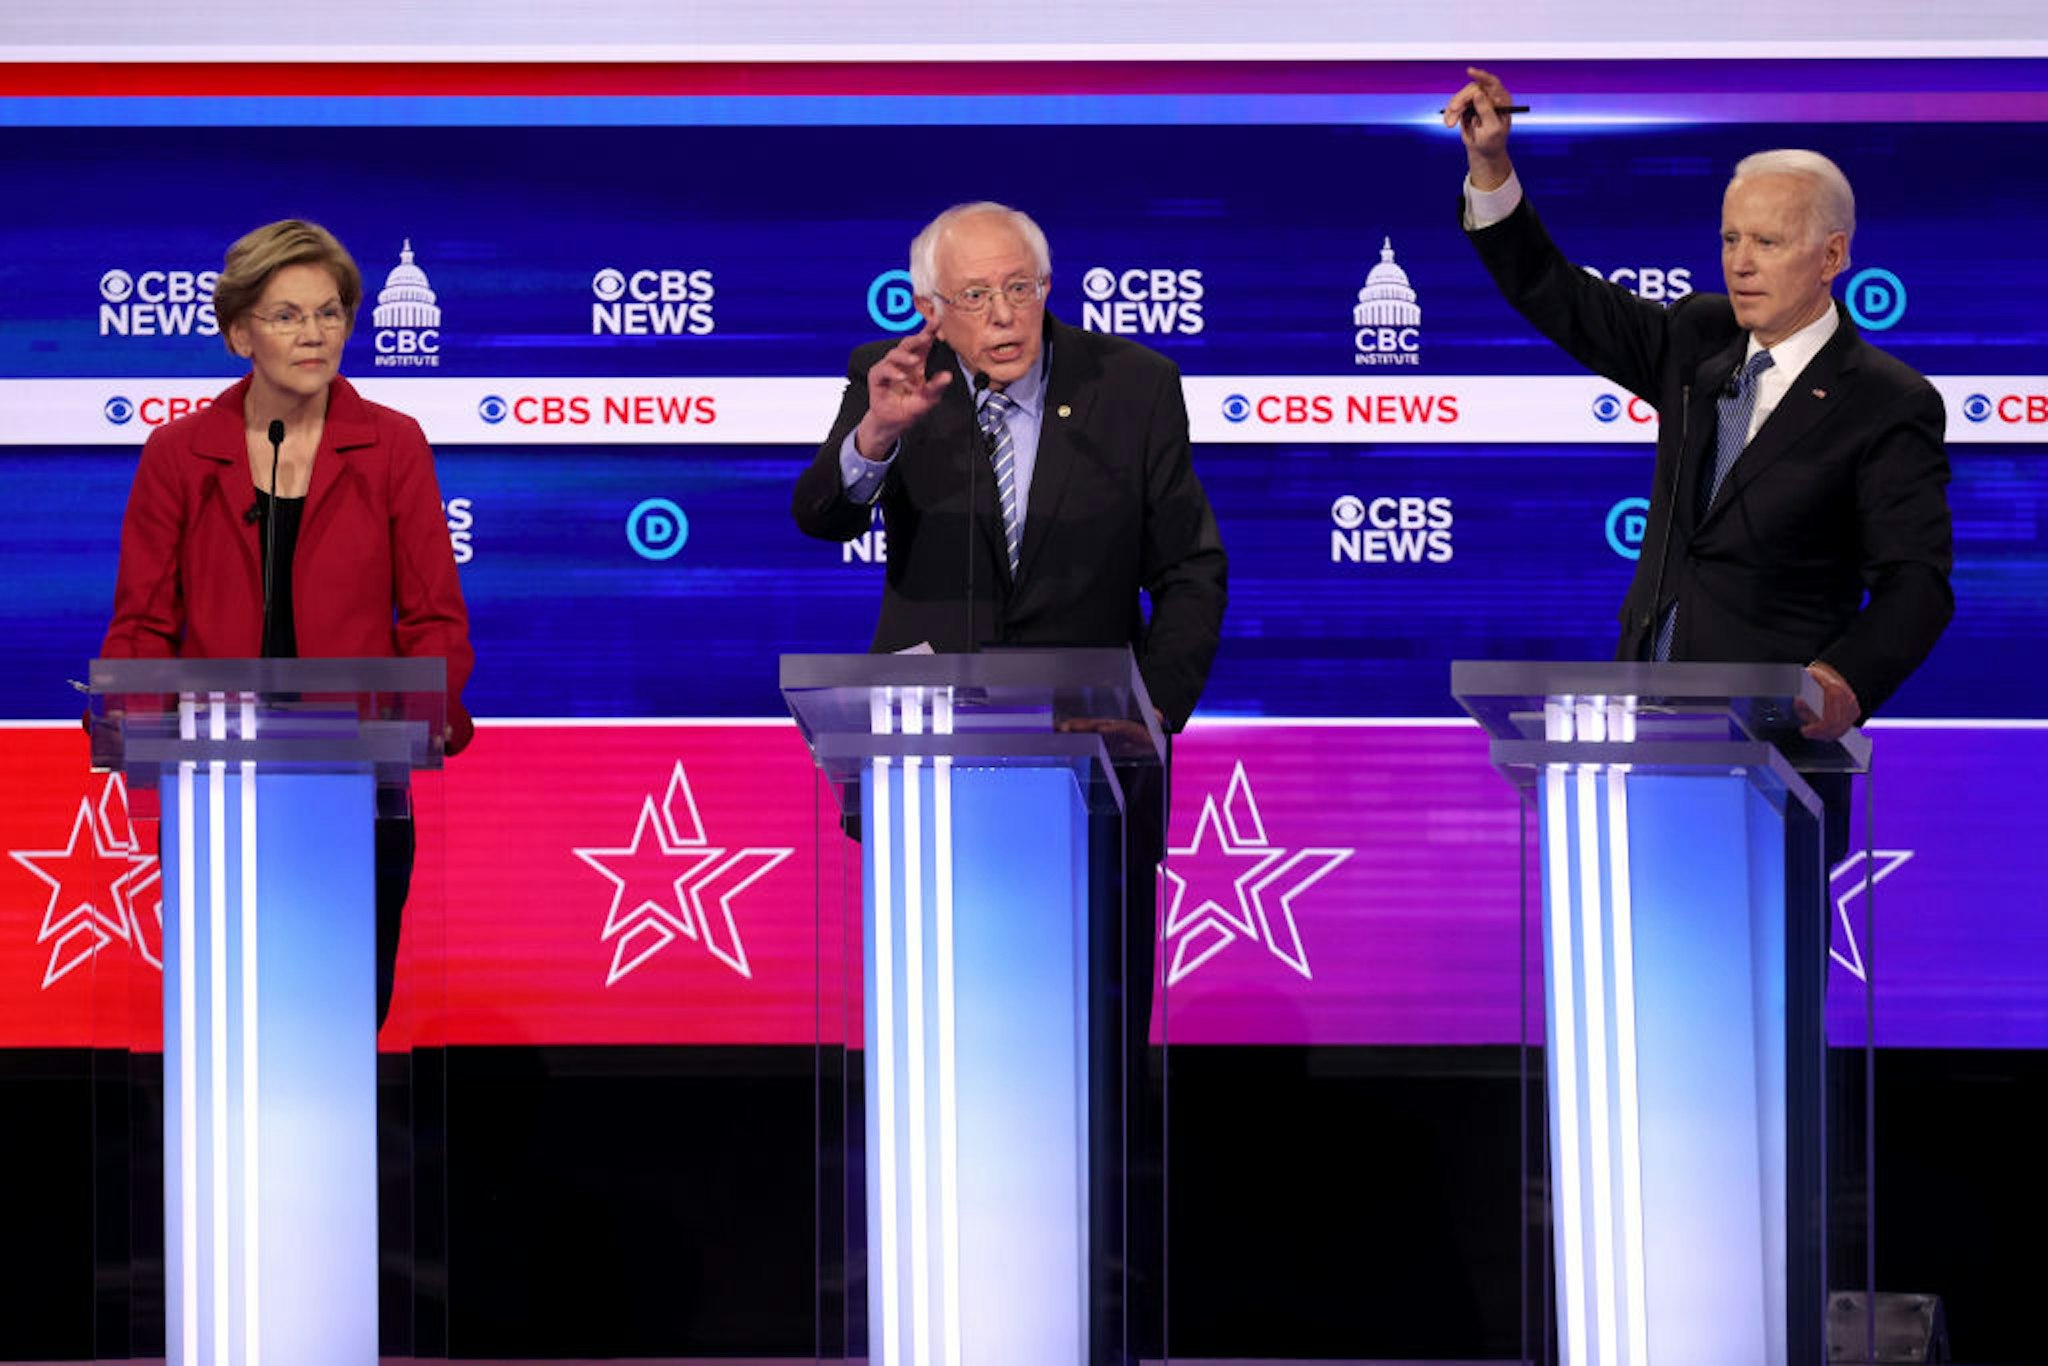 CHARLESTON, SOUTH CAROLINA - FEBRUARY 25: Democratic presidential candidates (L-R) Sen. Elizabeth Warren (D-MA), Sen. Bernie Sanders (I-VT) and former Vice President Joe Biden participate the Democratic presidential primary debate at the Charleston Gaillard Center on February 25, 2020 in Charleston, South Carolina. Seven candidates qualified for the debate, hosted by CBS News and Congressional Black Caucus Institute, ahead of South Carolina’s primary in four days. (Photo by